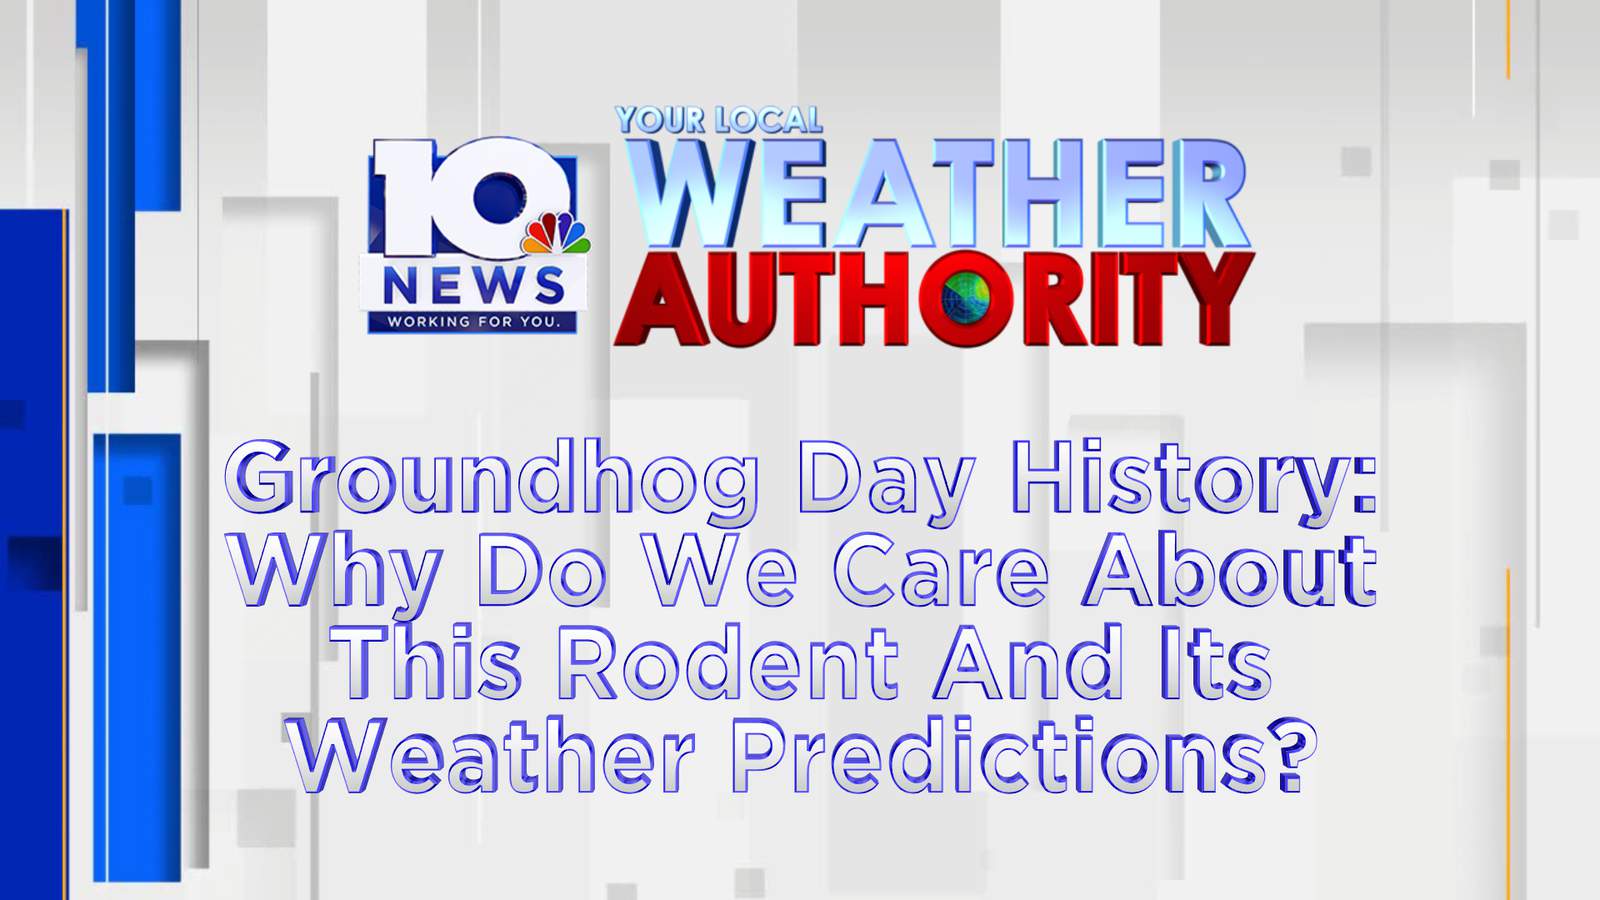 Beyond The Forecast: Diving into the history of Groundhog Day and the rodent’s weather predictions